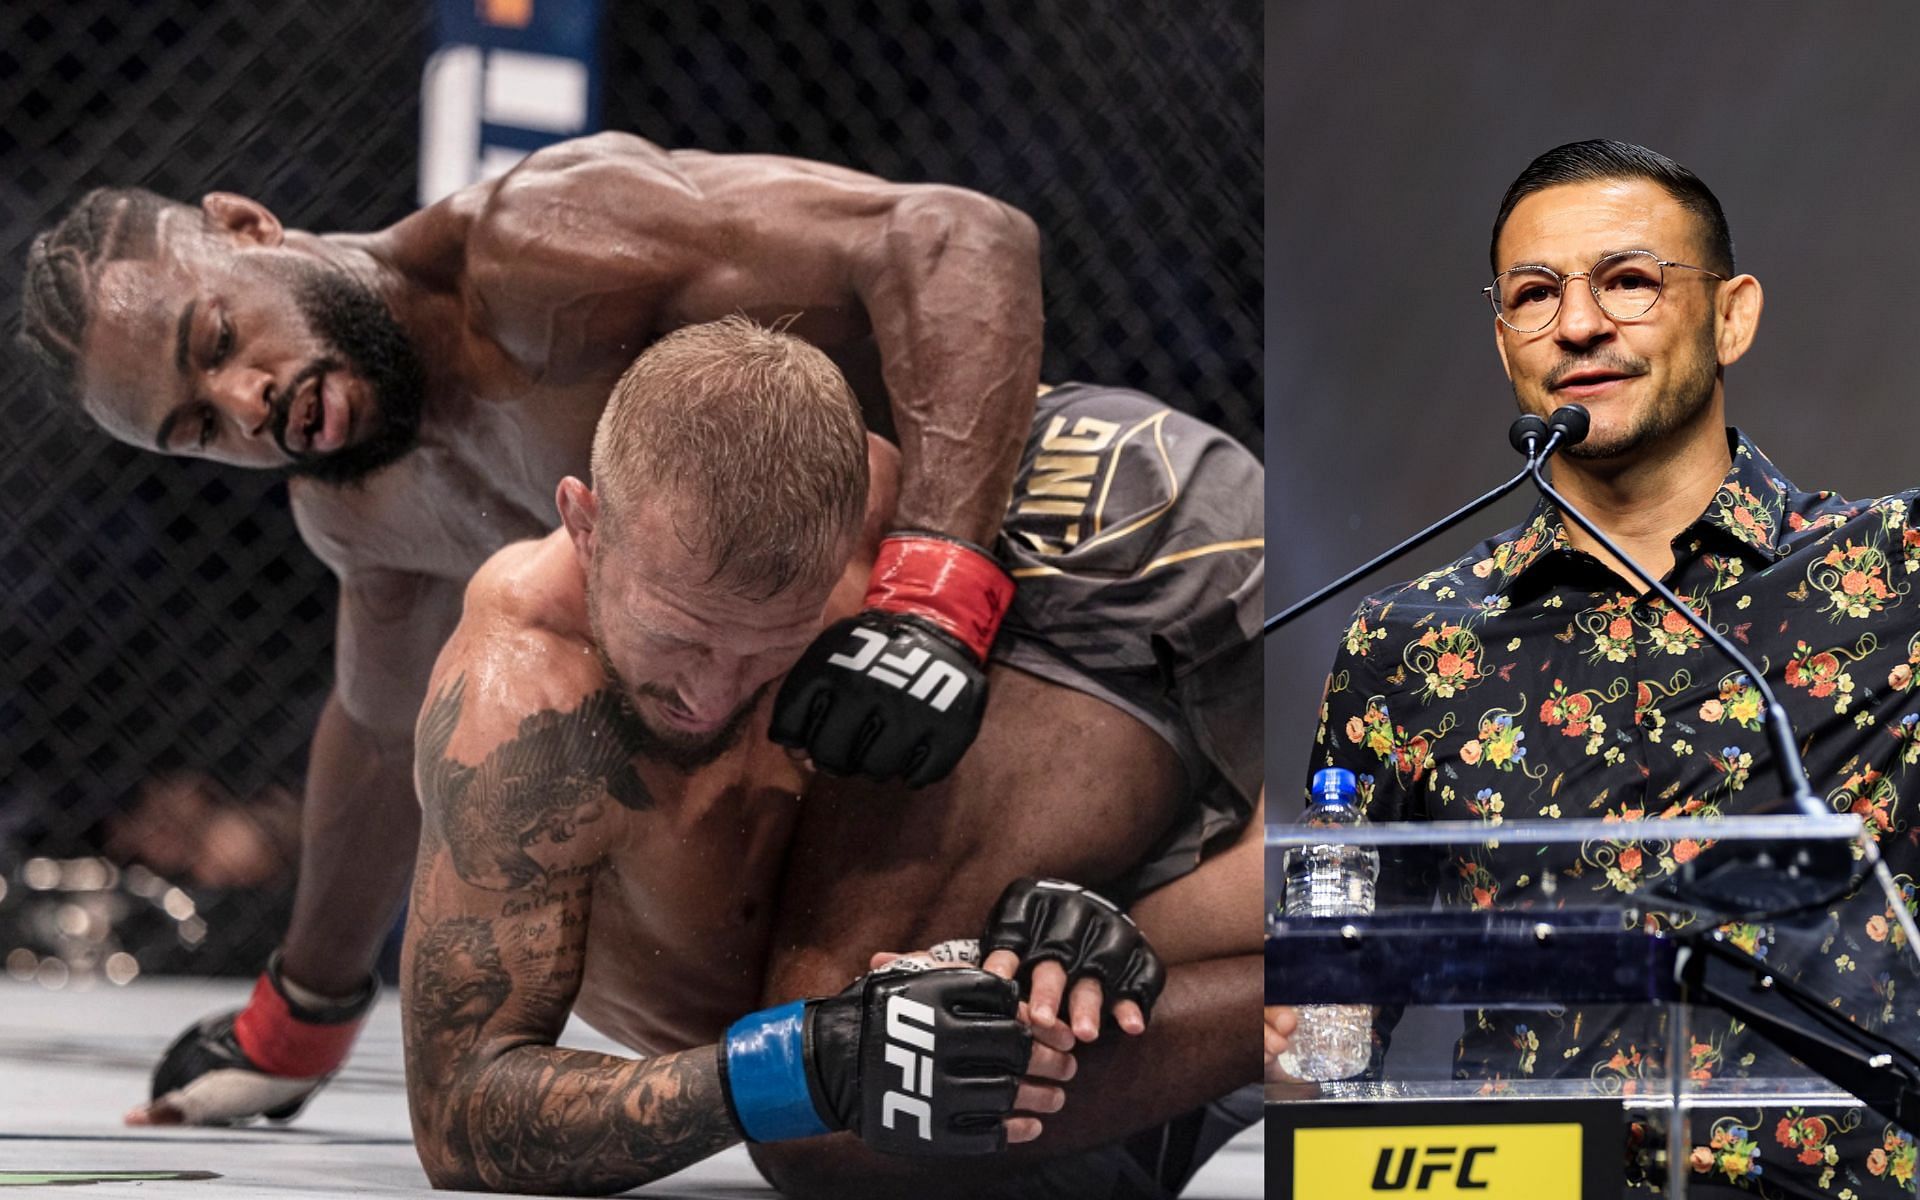 Aljamain Sterling vs. T.J. Dillashaw (left) and Cub Swanson (right). [Images courtesy: left image from USA Today and right image from Getty Images]